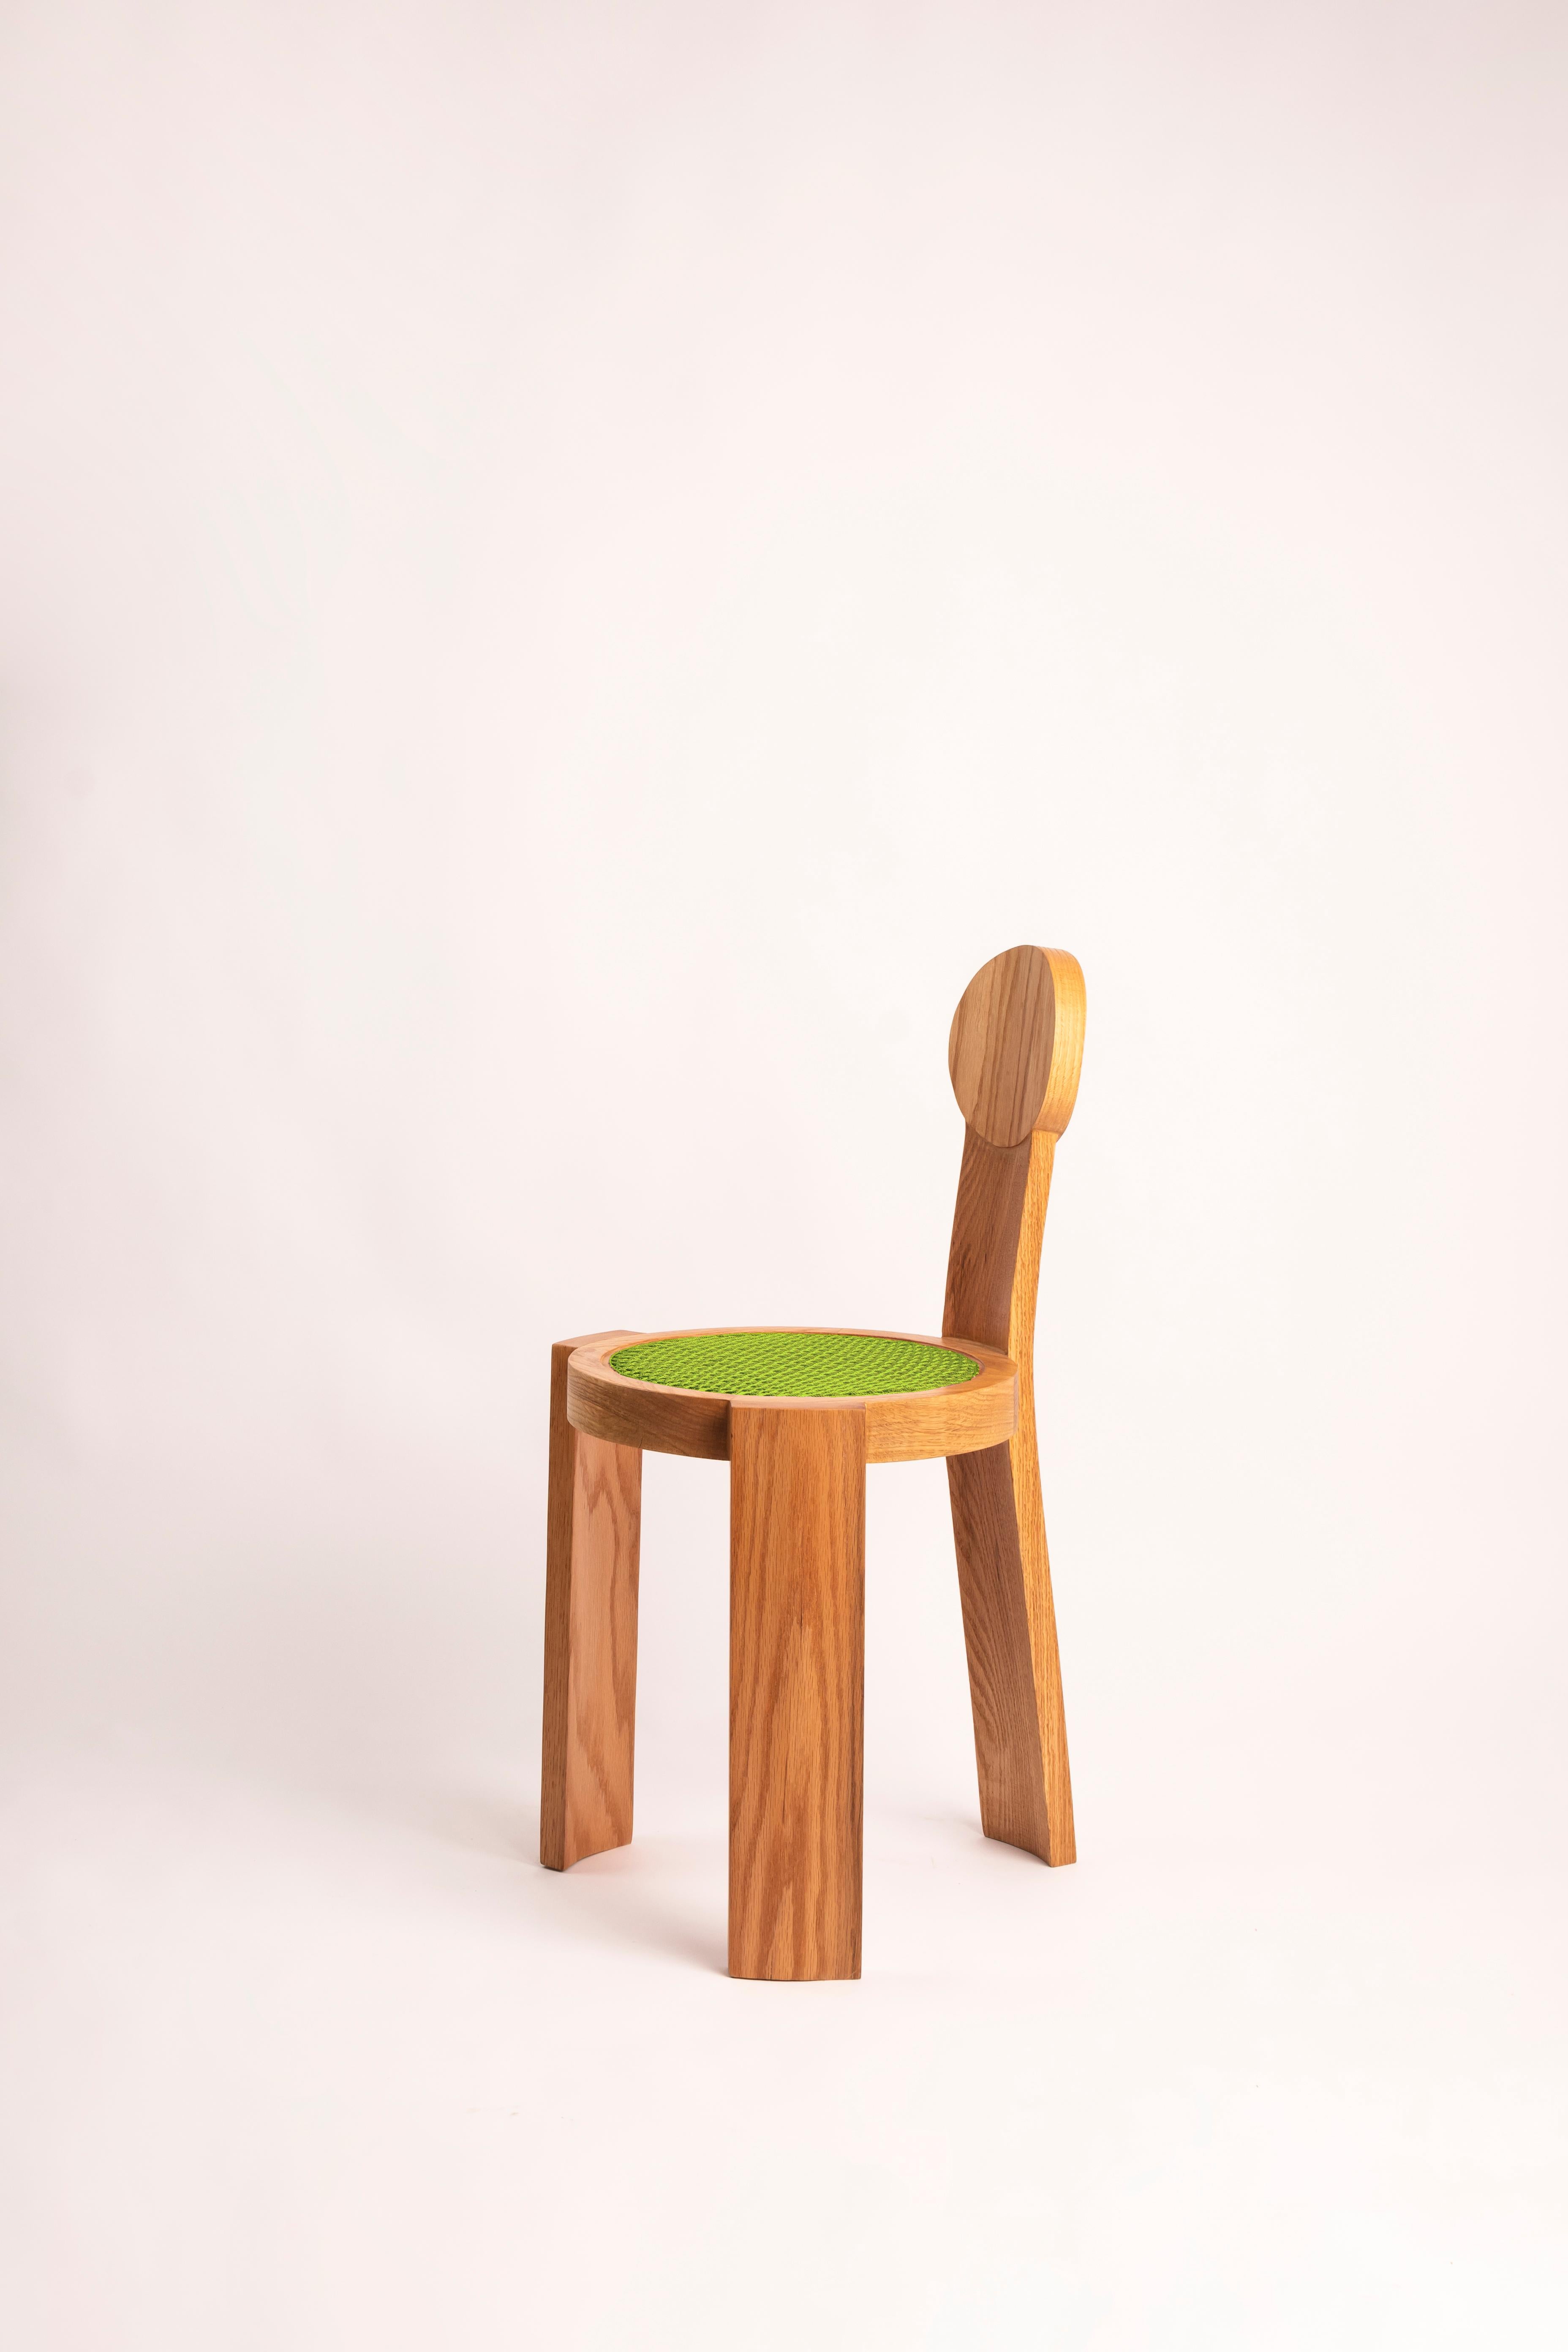 Woodwork Chair D For Sale